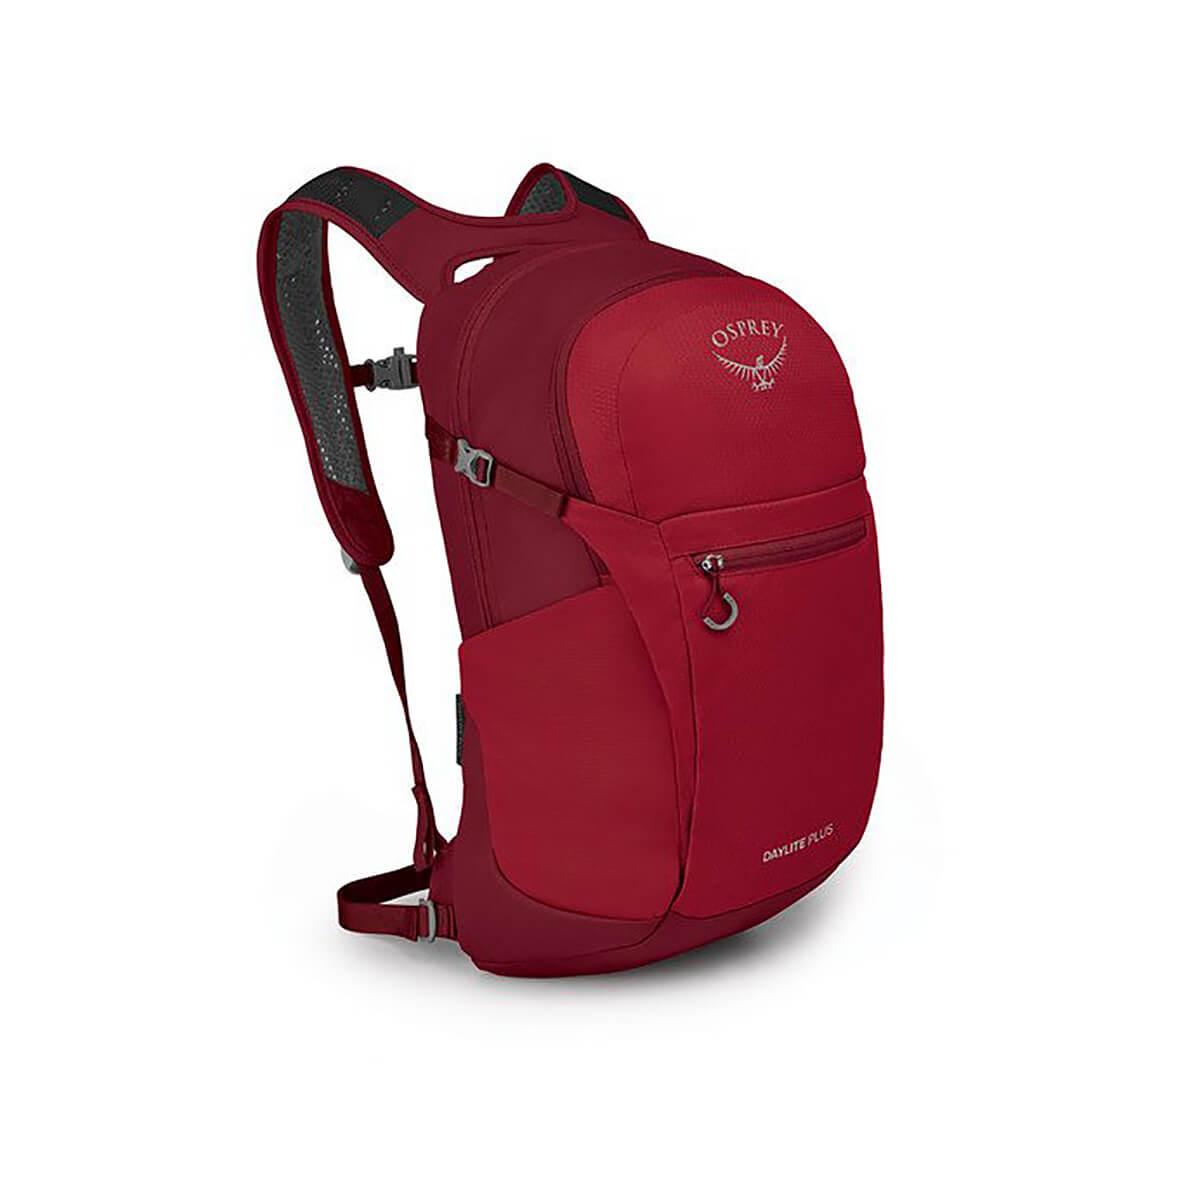  Daylite Plus Backpack